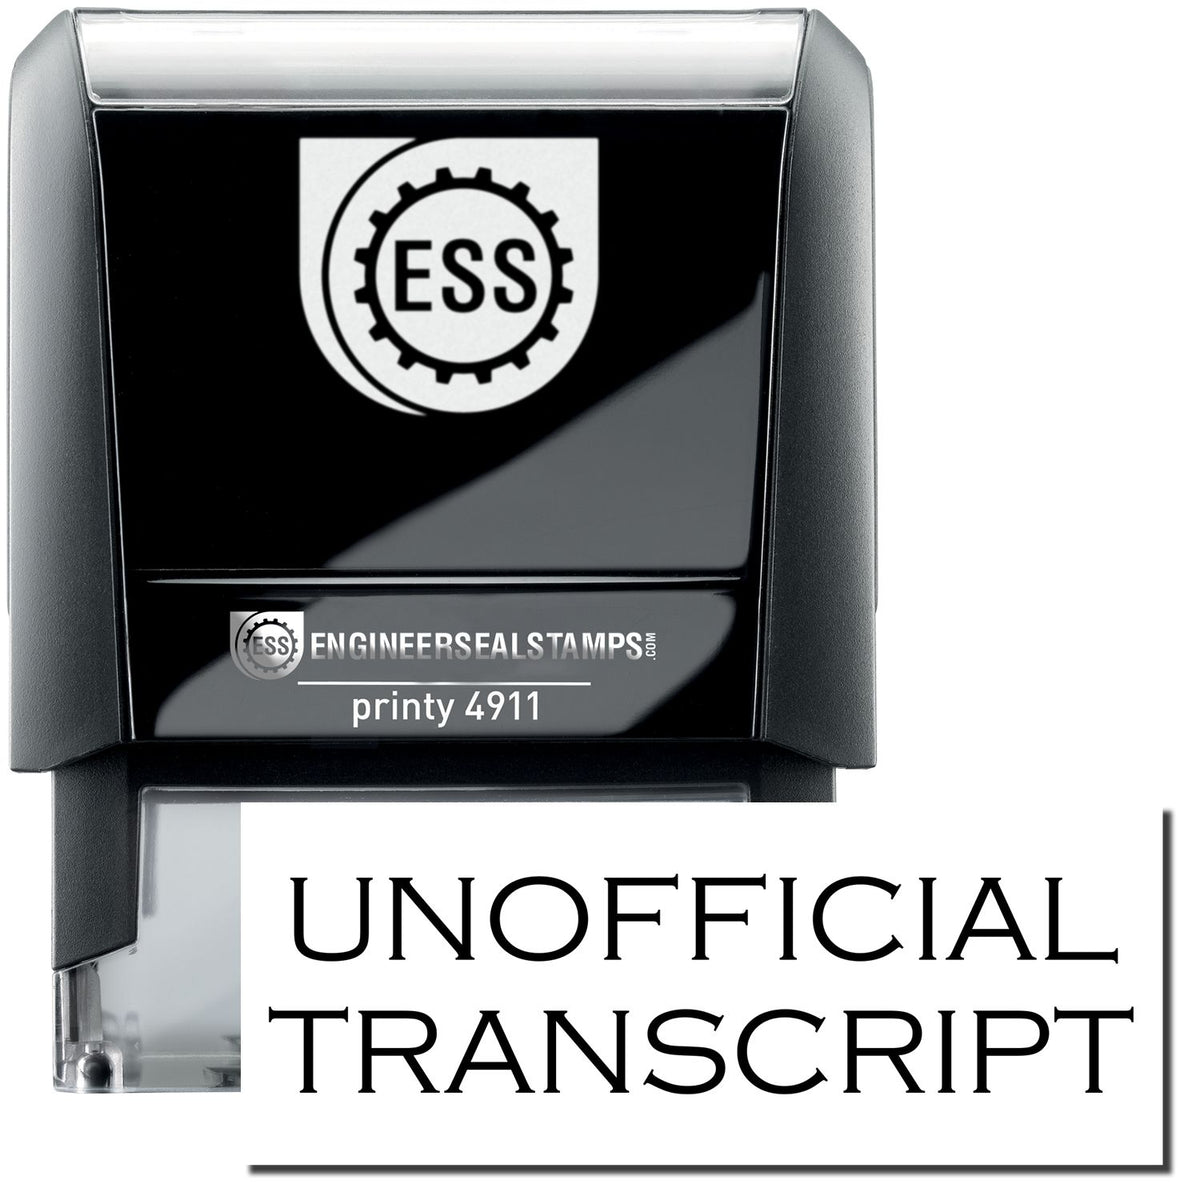 A self-inking stamp with a stamped image showing how the text &quot;UNOFFICIAL TRANSCRIPT&quot; is displayed after stamping.